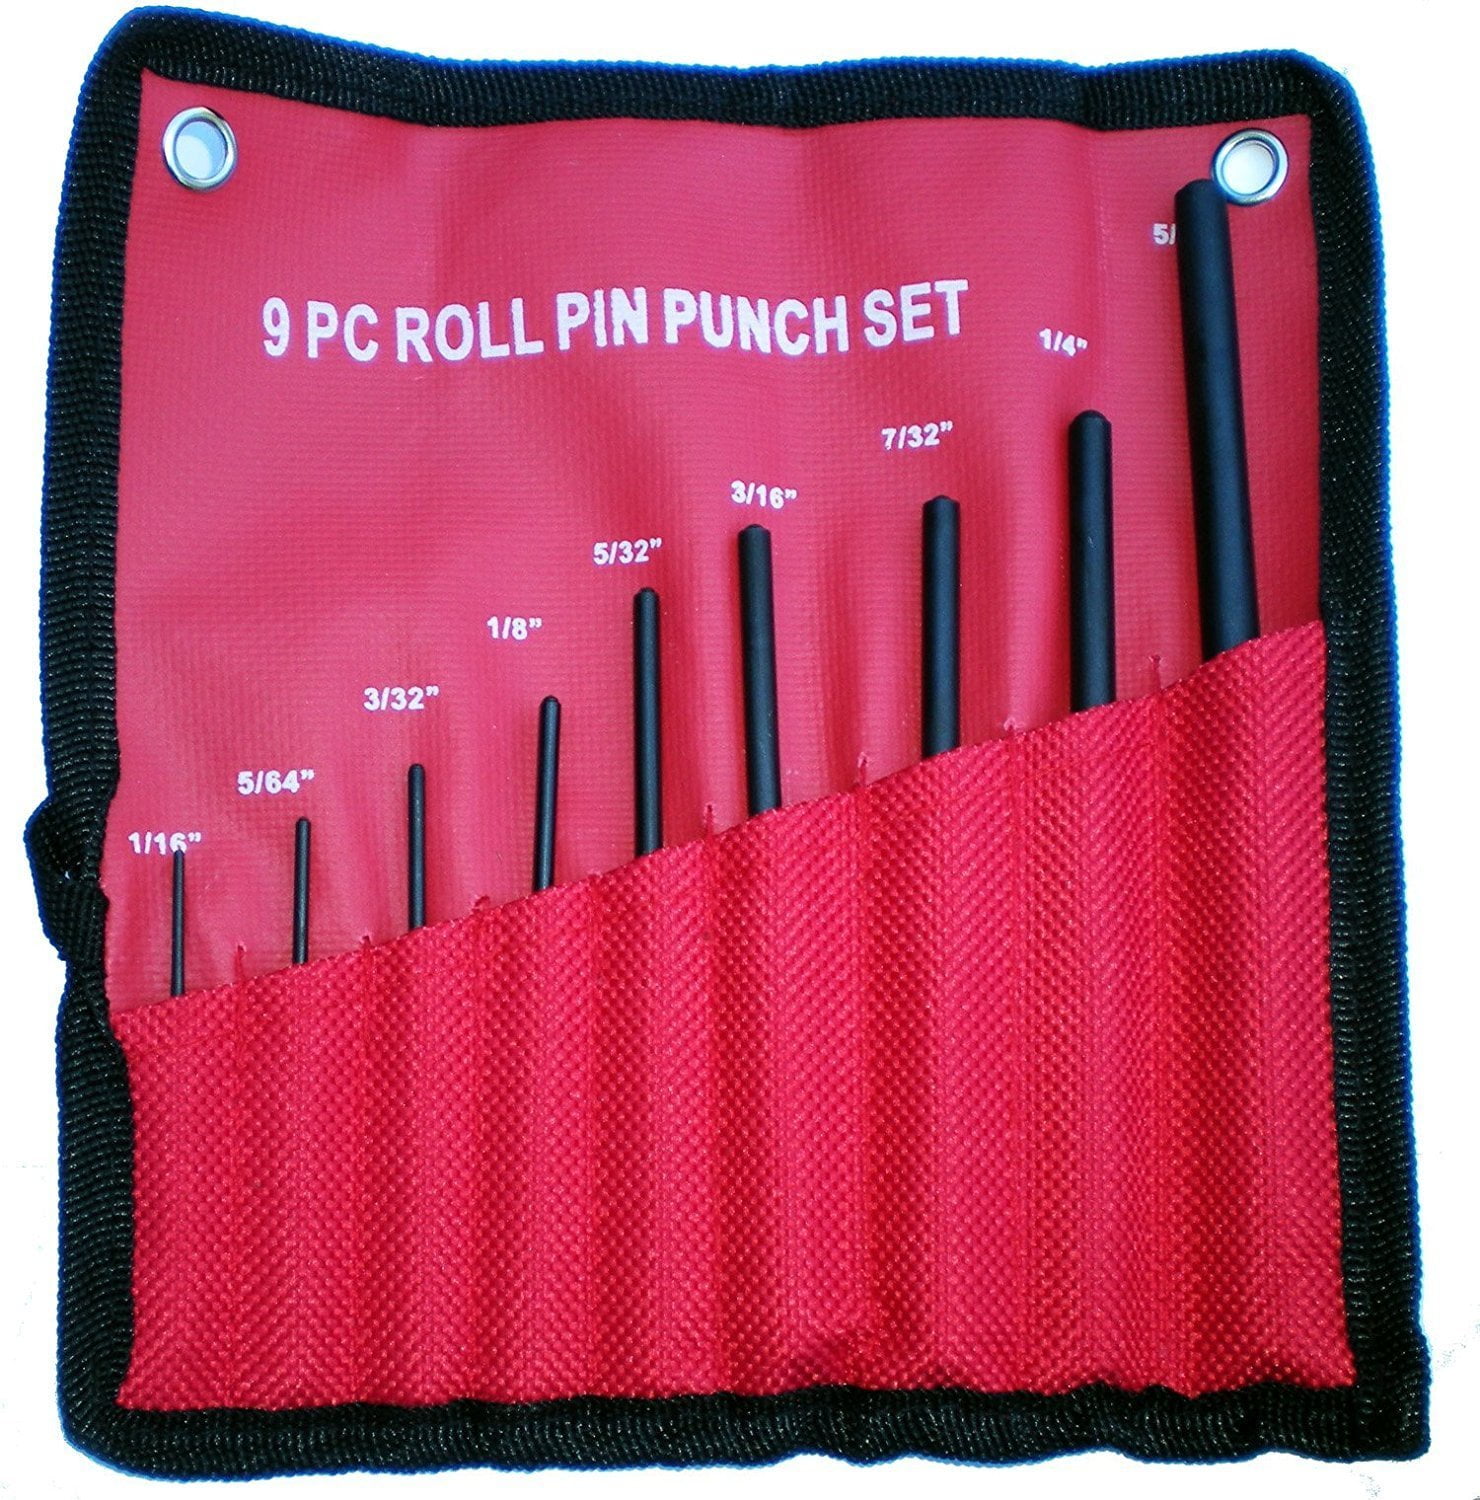 Roll Pin Punch Set 9 Pieces Roll Pin Starter Punch Set, Gunsmith Punch Set Roll Pin Removal Tool for Gunsmithing, Watch Cleaning, Rifle Pins and Craft